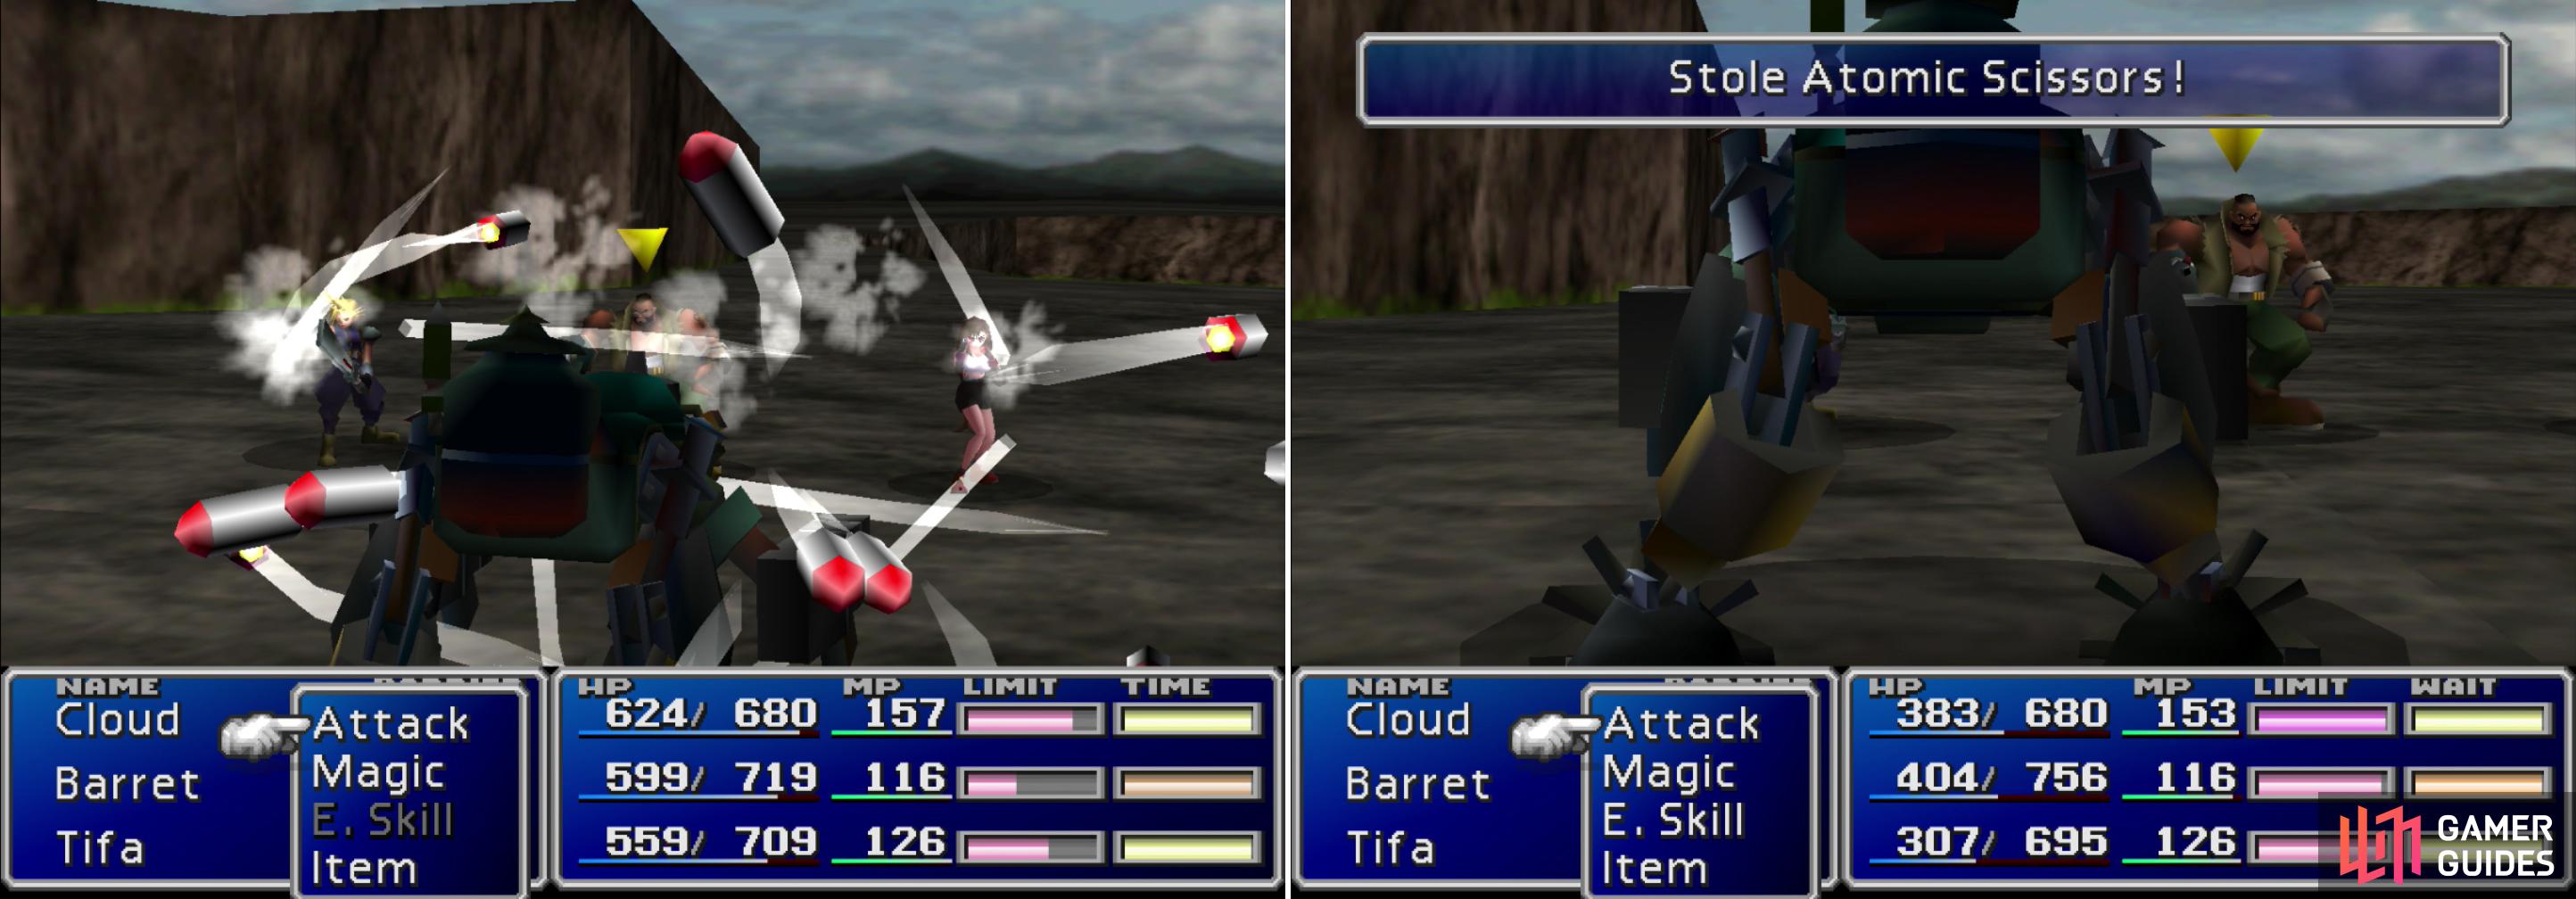 You can learn your first Enemy Skill, “Matra Magic” from Custom Sweeper enemies around Midgar (left). You can also steal Atomic Scissors from them (right).